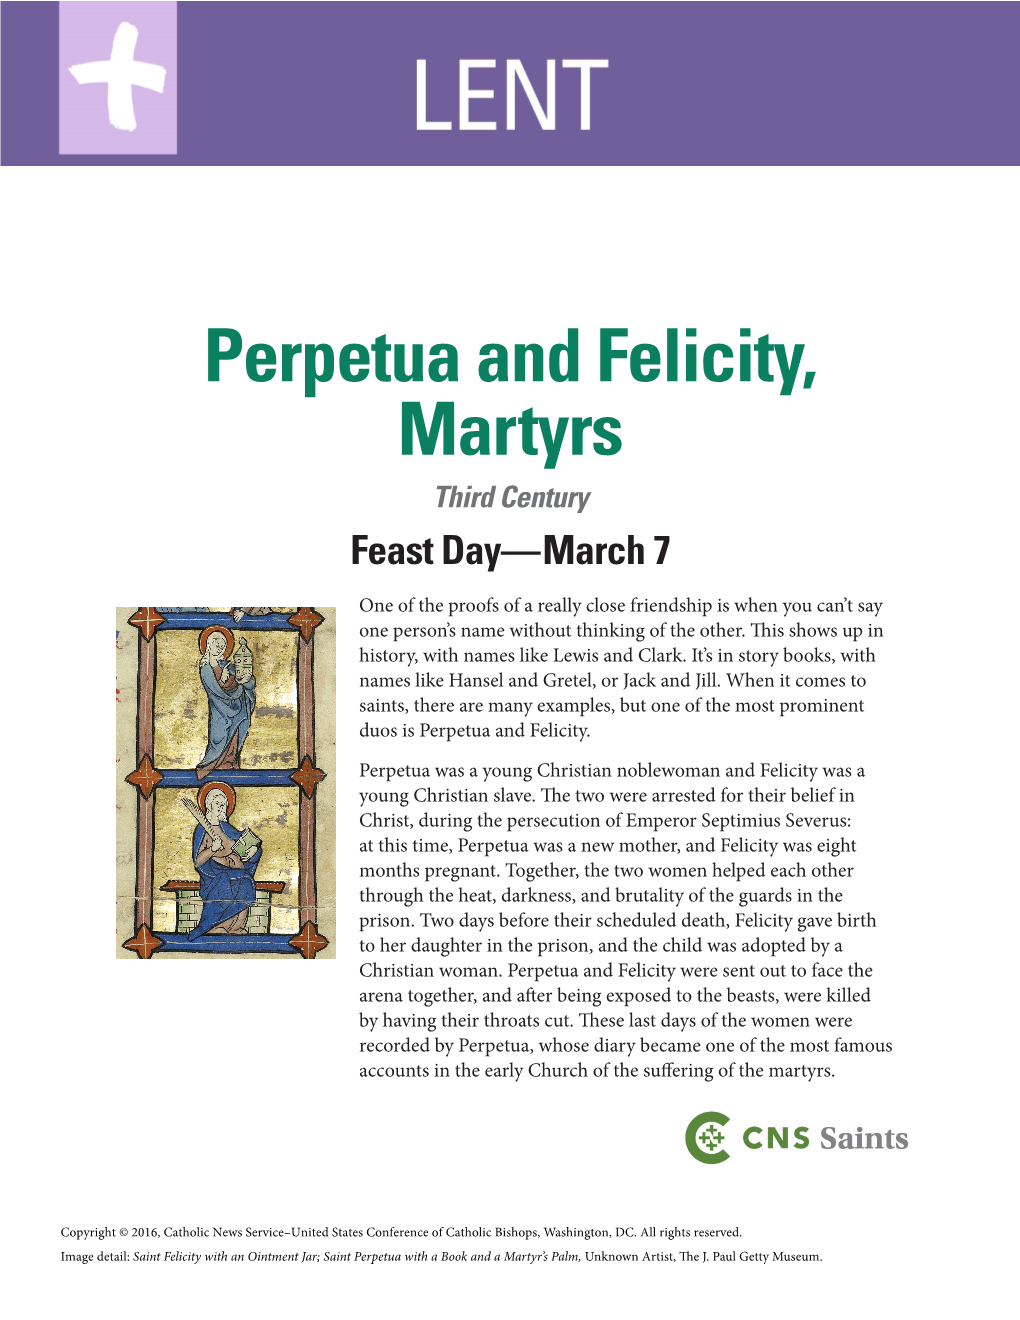 Perpetua and Felicity, Martyrs Third Century Feast Day—March 7